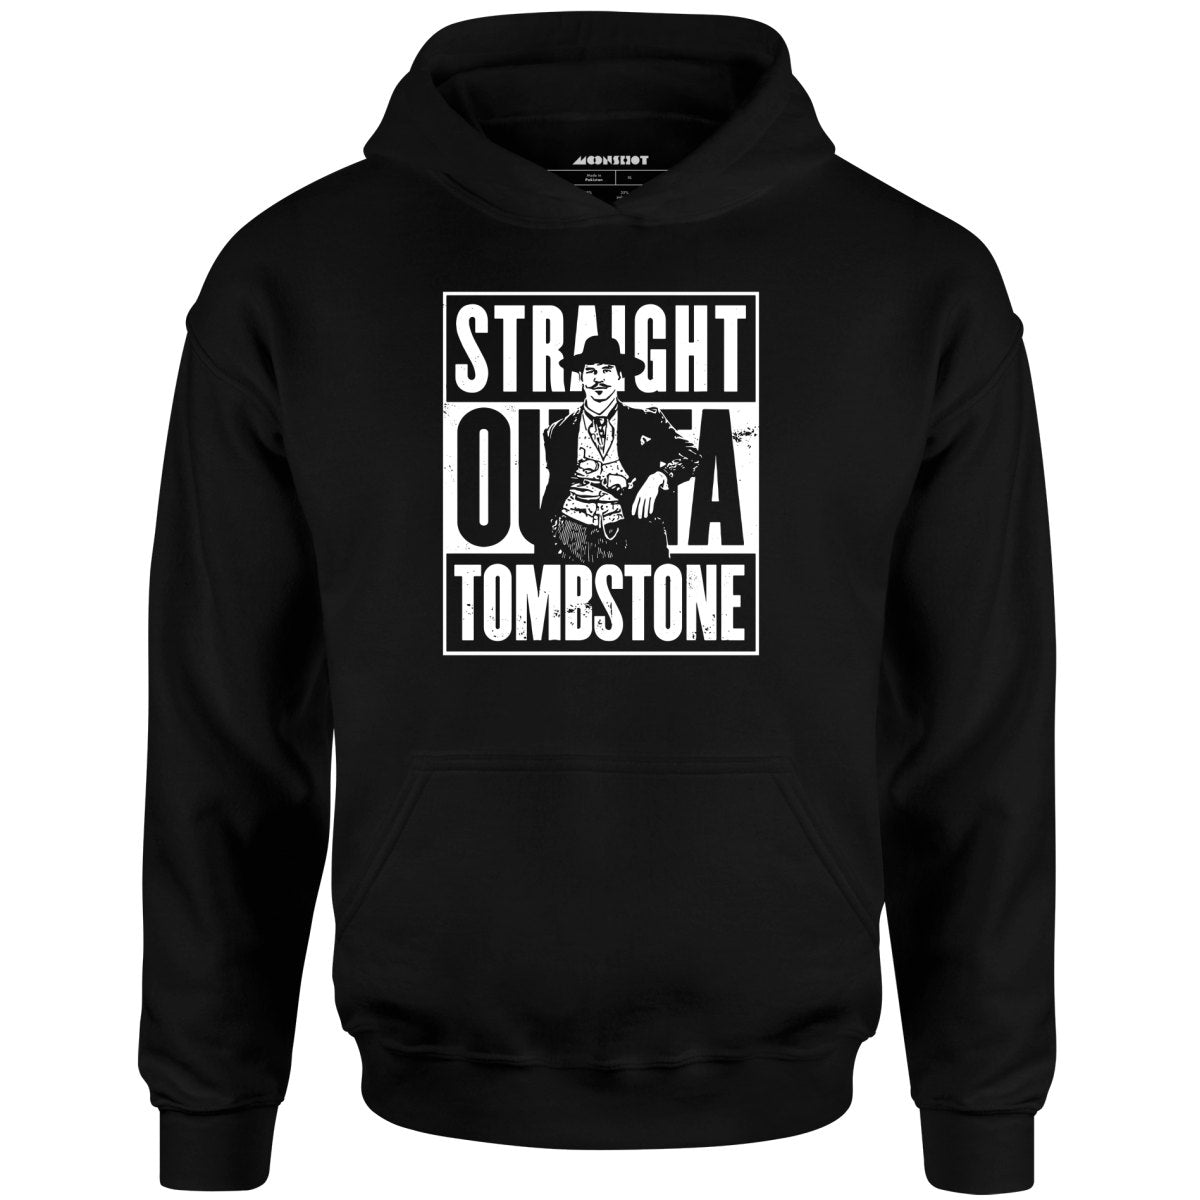 Straight Outta Tombstone - Unisex Hoodie